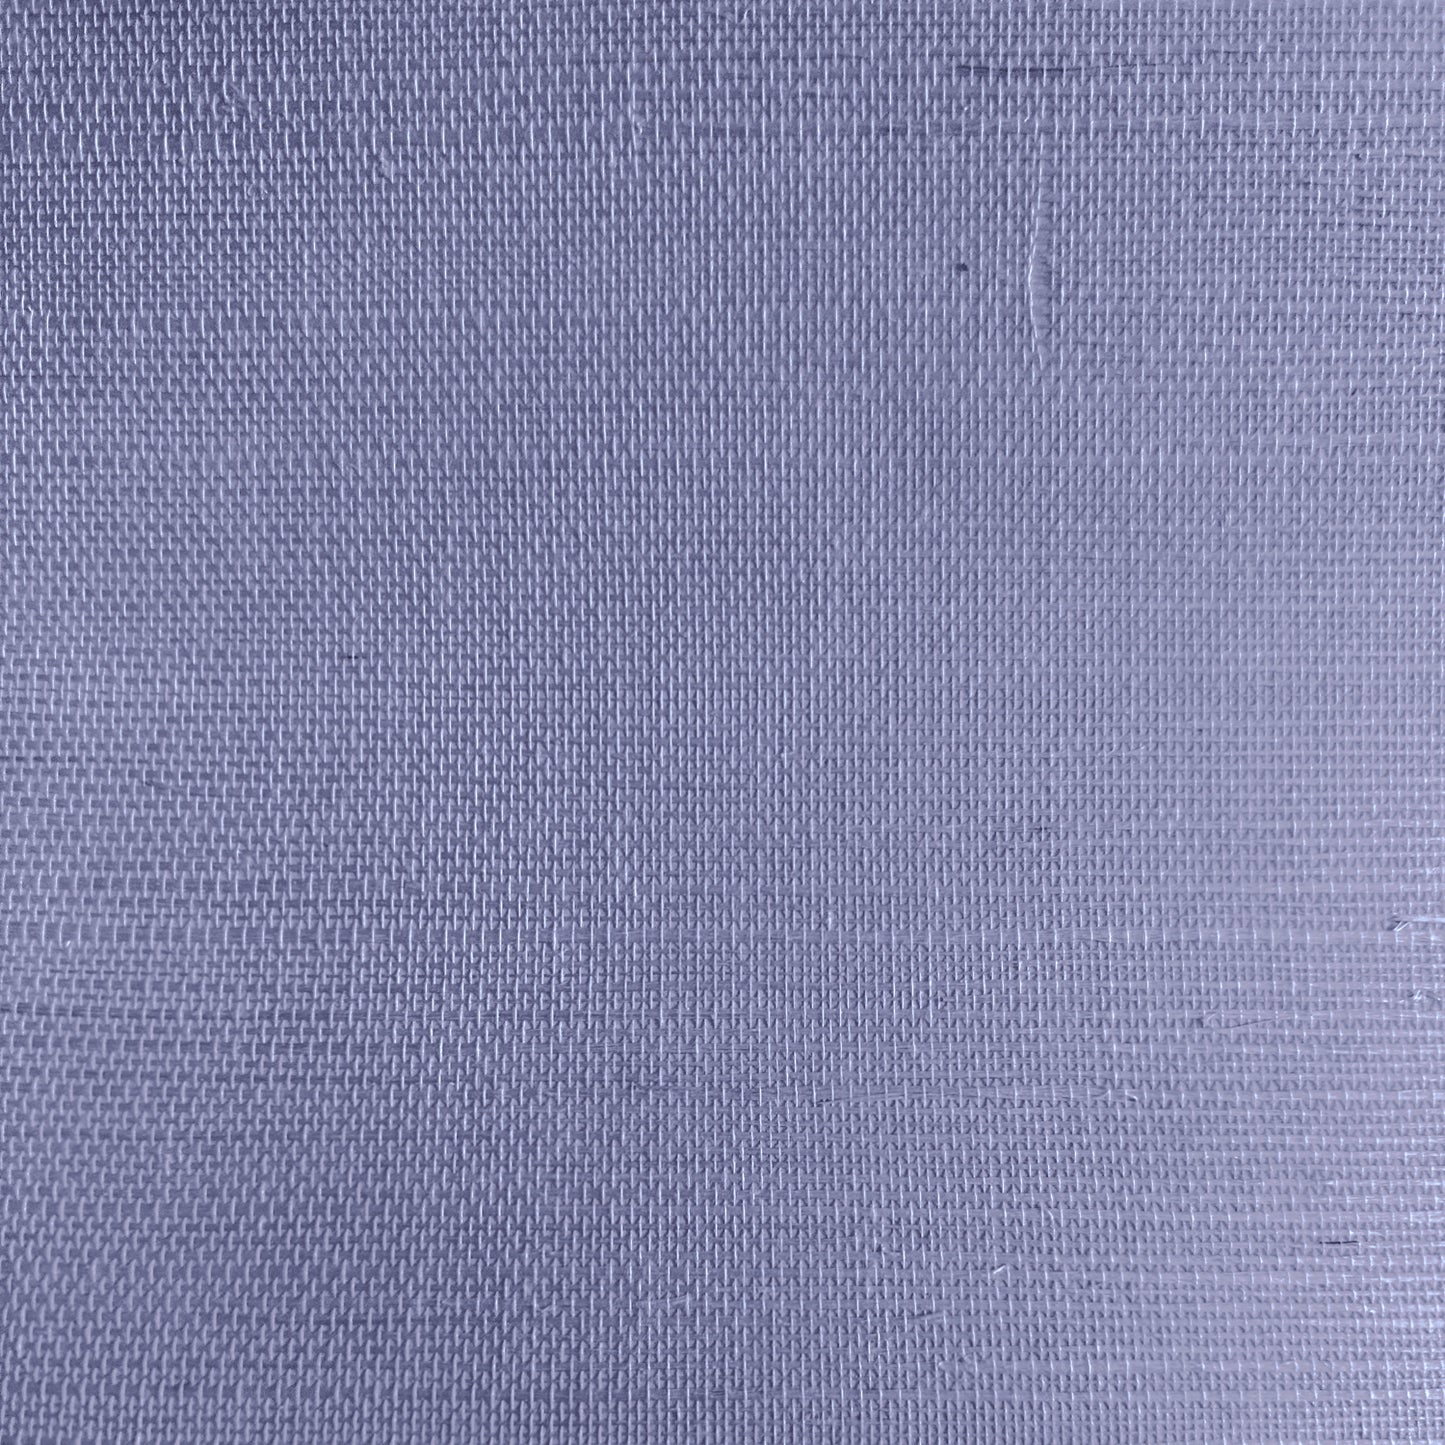 Denim Blue Solid Fabric, Wallpaper and Home Decor